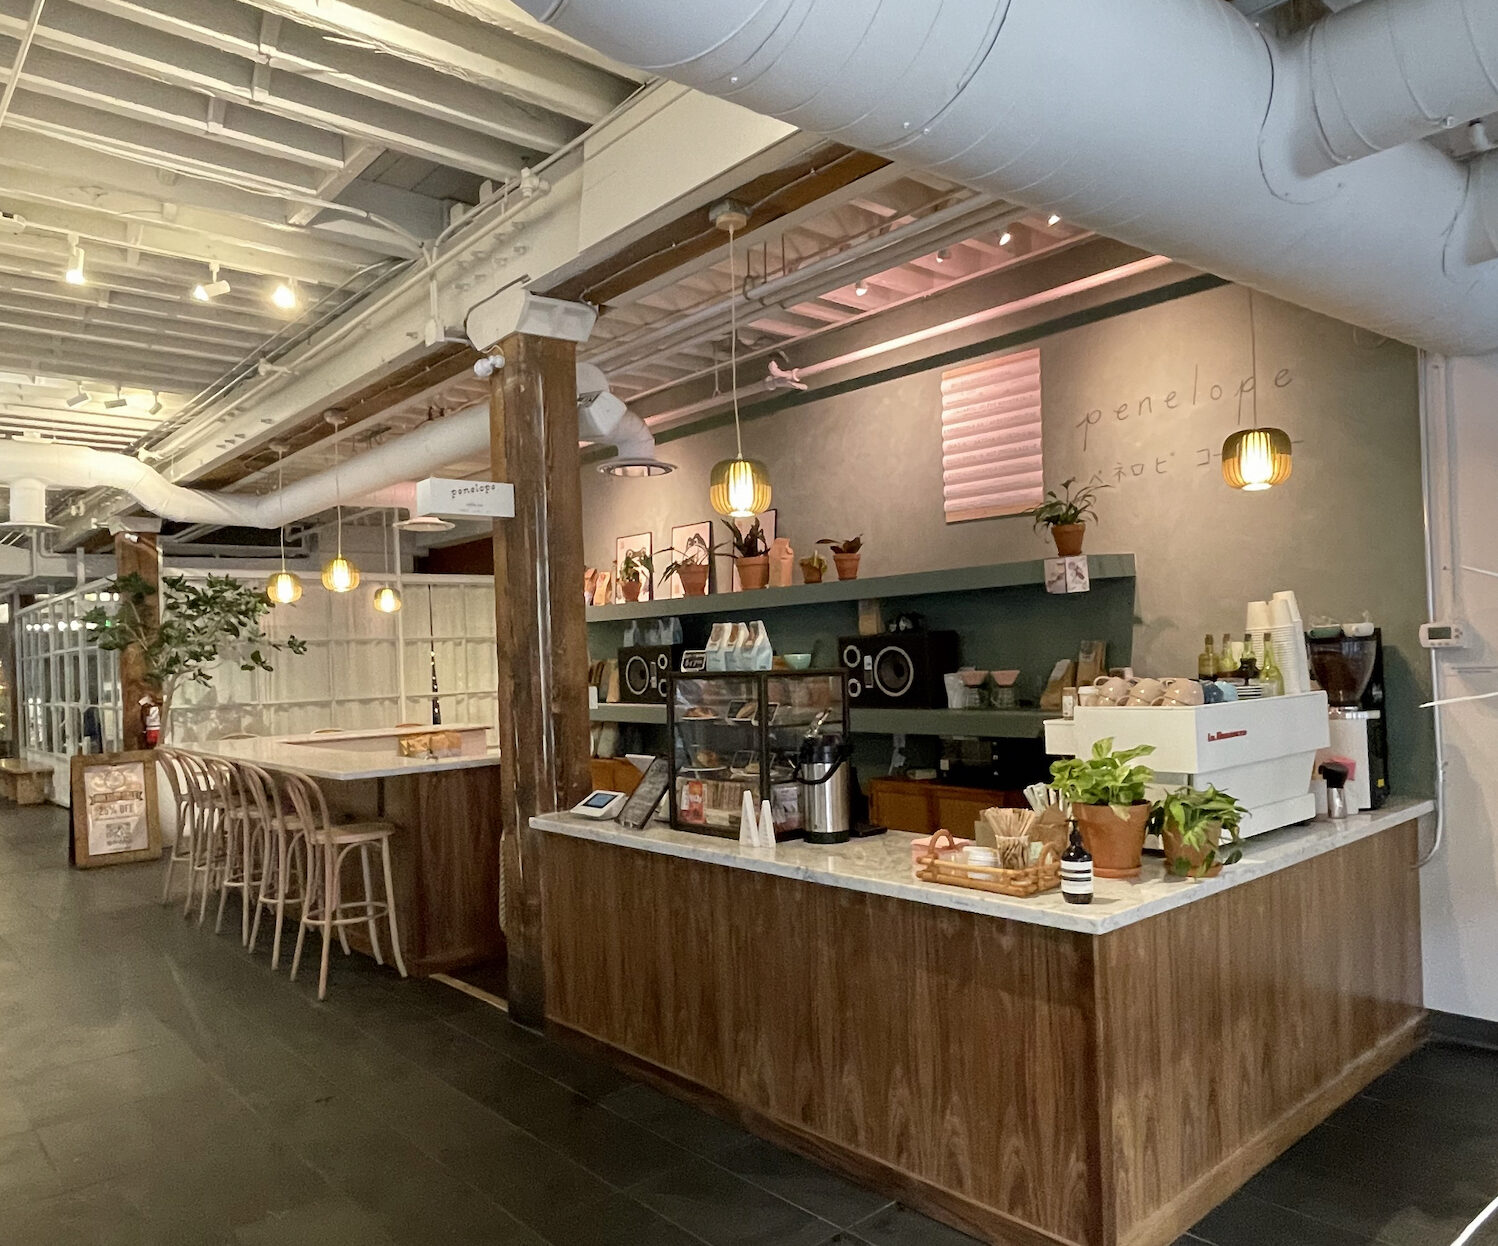 Penelope Coffee Bar Opens Inside FREE MARKET at Dairy Block - Mile High CRE